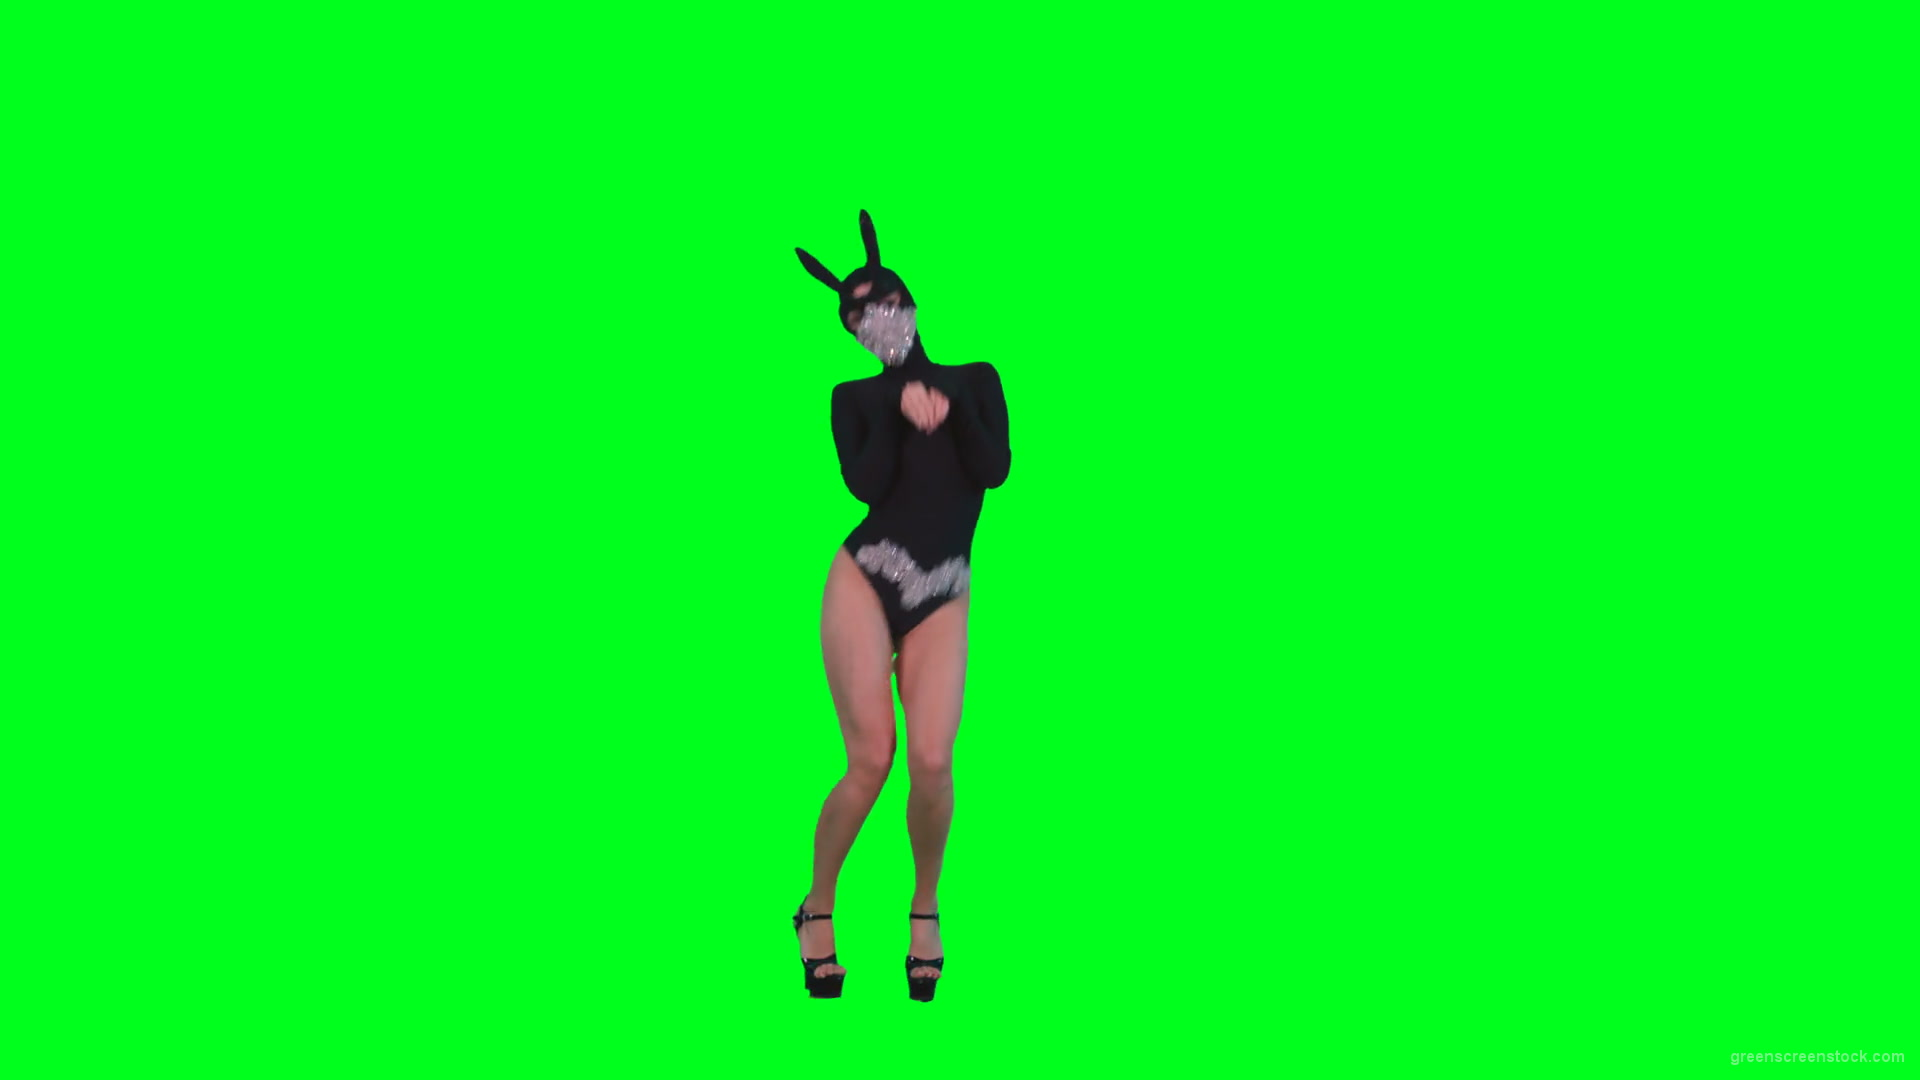 Go-Go-Dancing-Girl-in-Rabbit-Mask-jumping-in-black-costume-on-Green-Screen-4K-Video-Footage-1920_008 Green Screen Stock